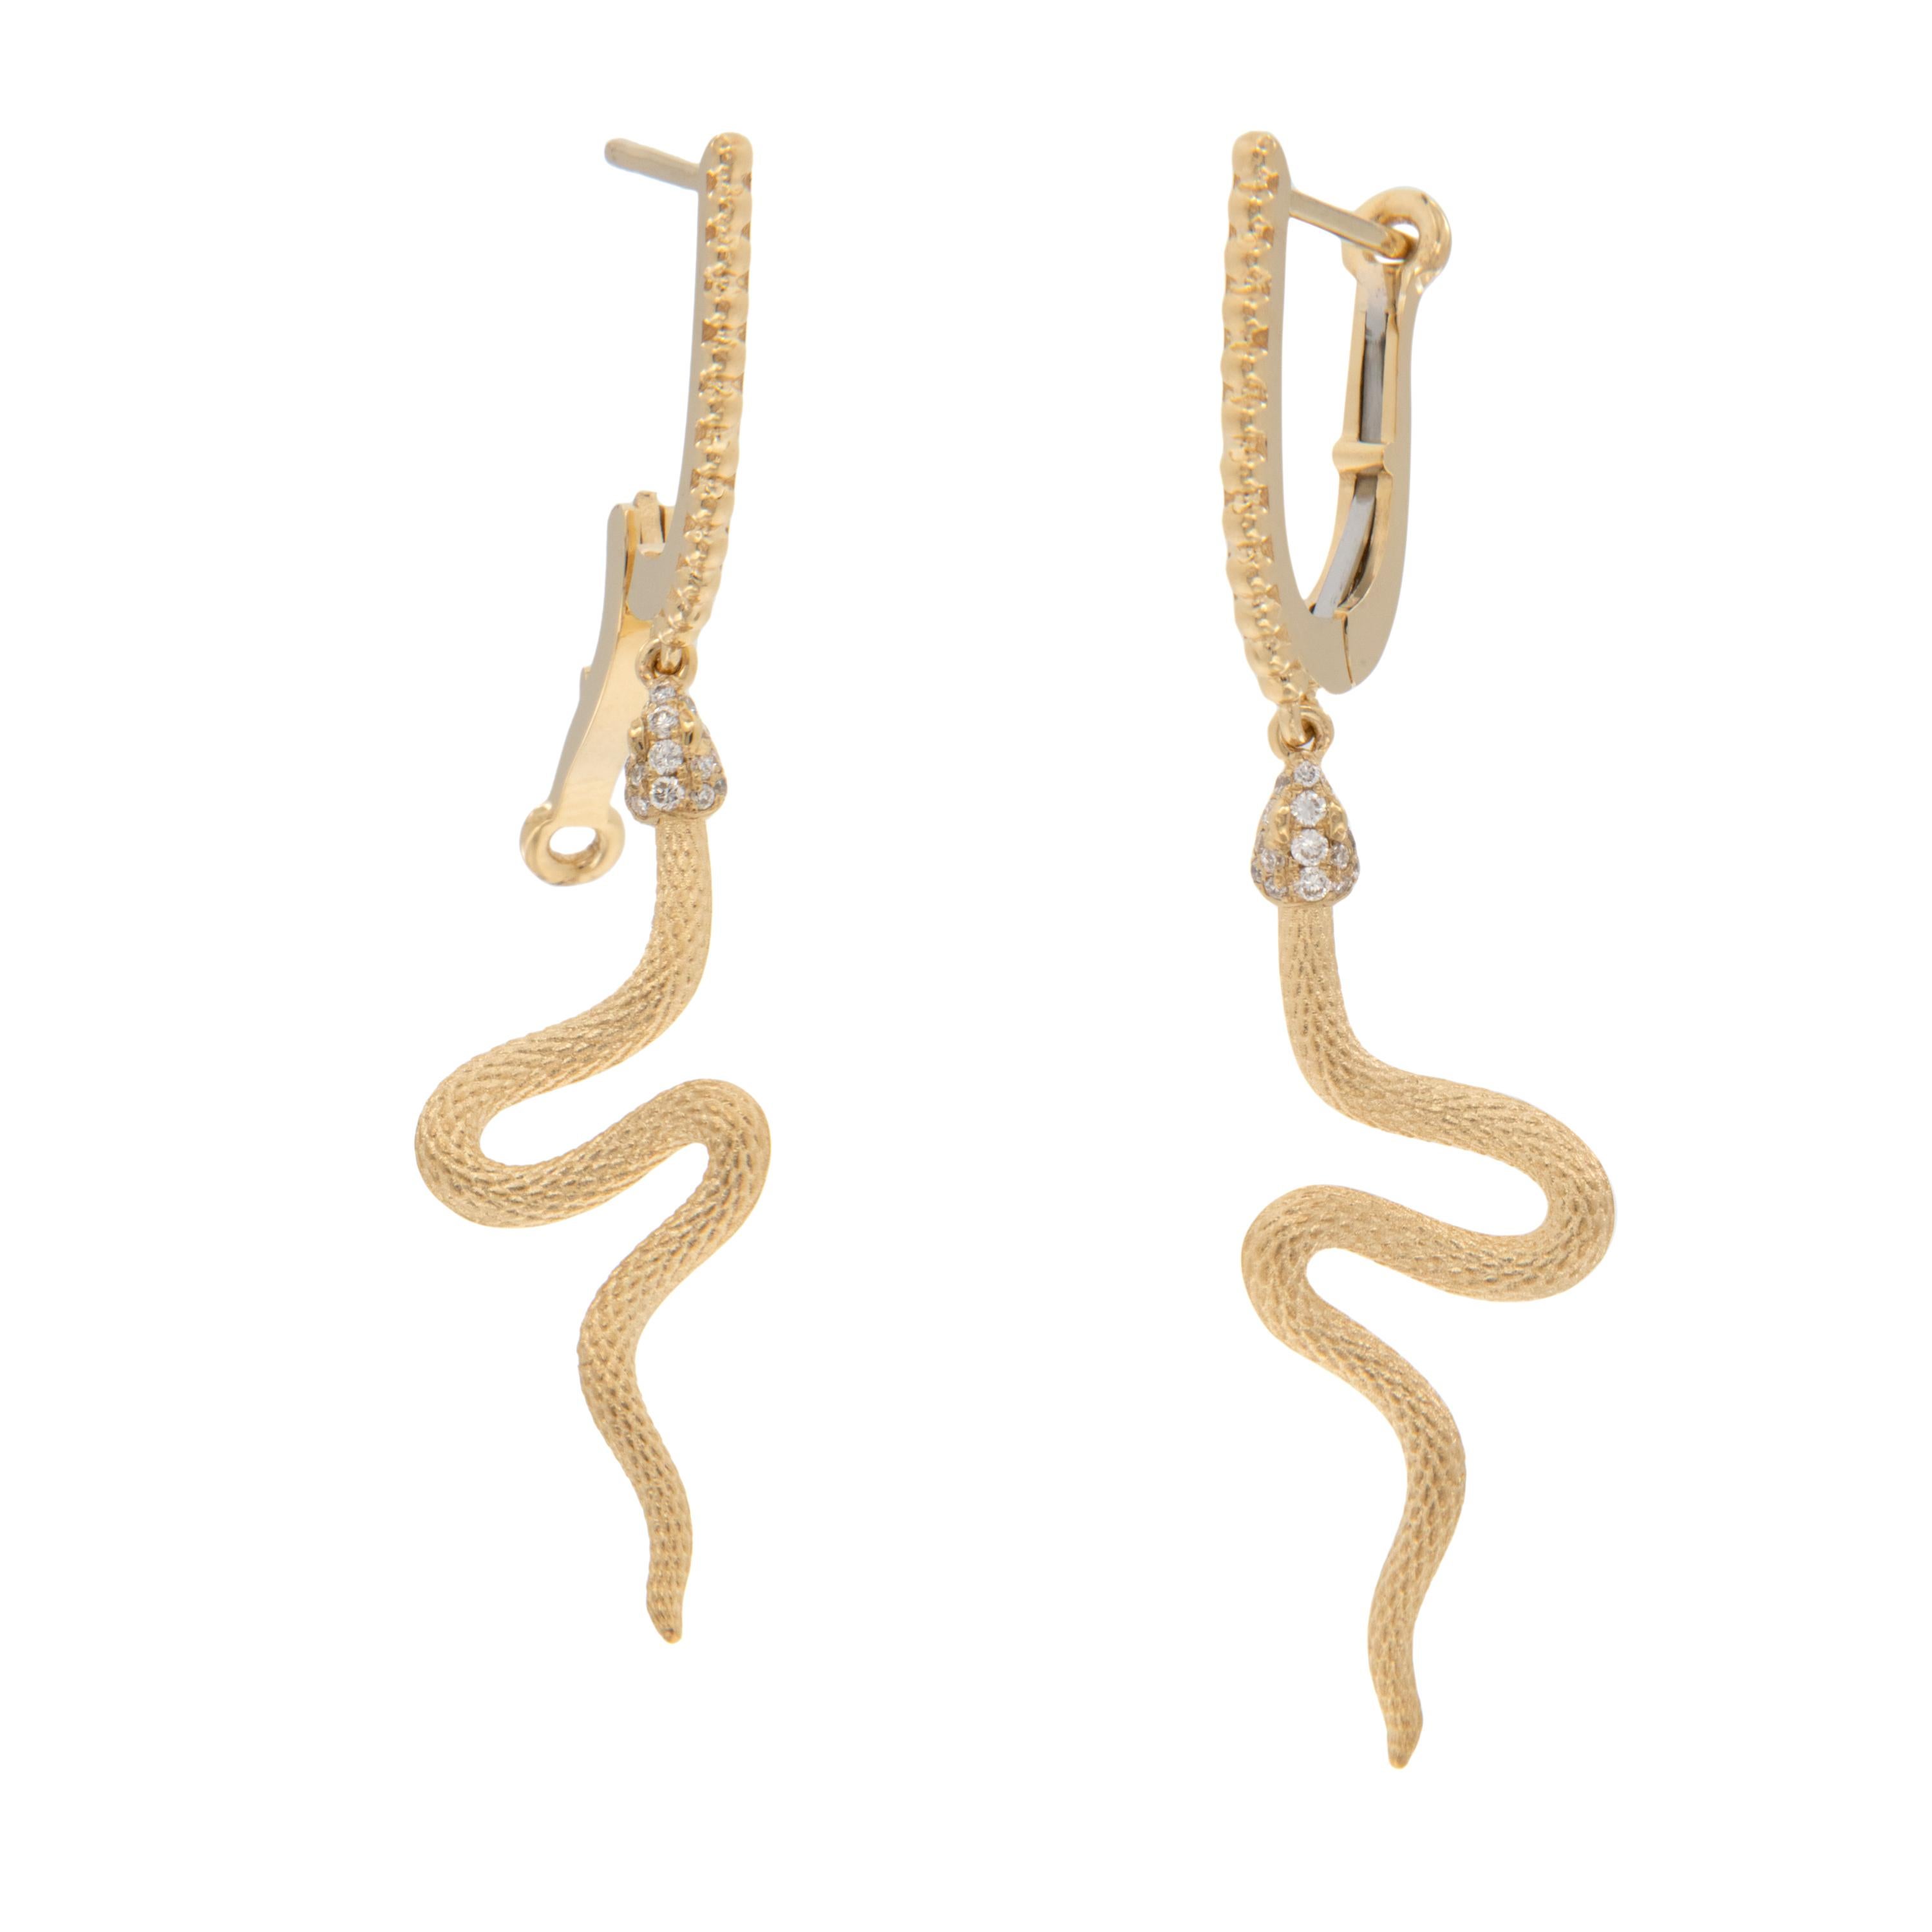 Serpents have been an iconic symbol in jewelry for ages from Cleopatra to Queen Victoria’s trendsetting engagement ring where the snake became a symbol for eternal love and commitment. These lovely serpent earrings with 0.11 cttw diamond eyes and